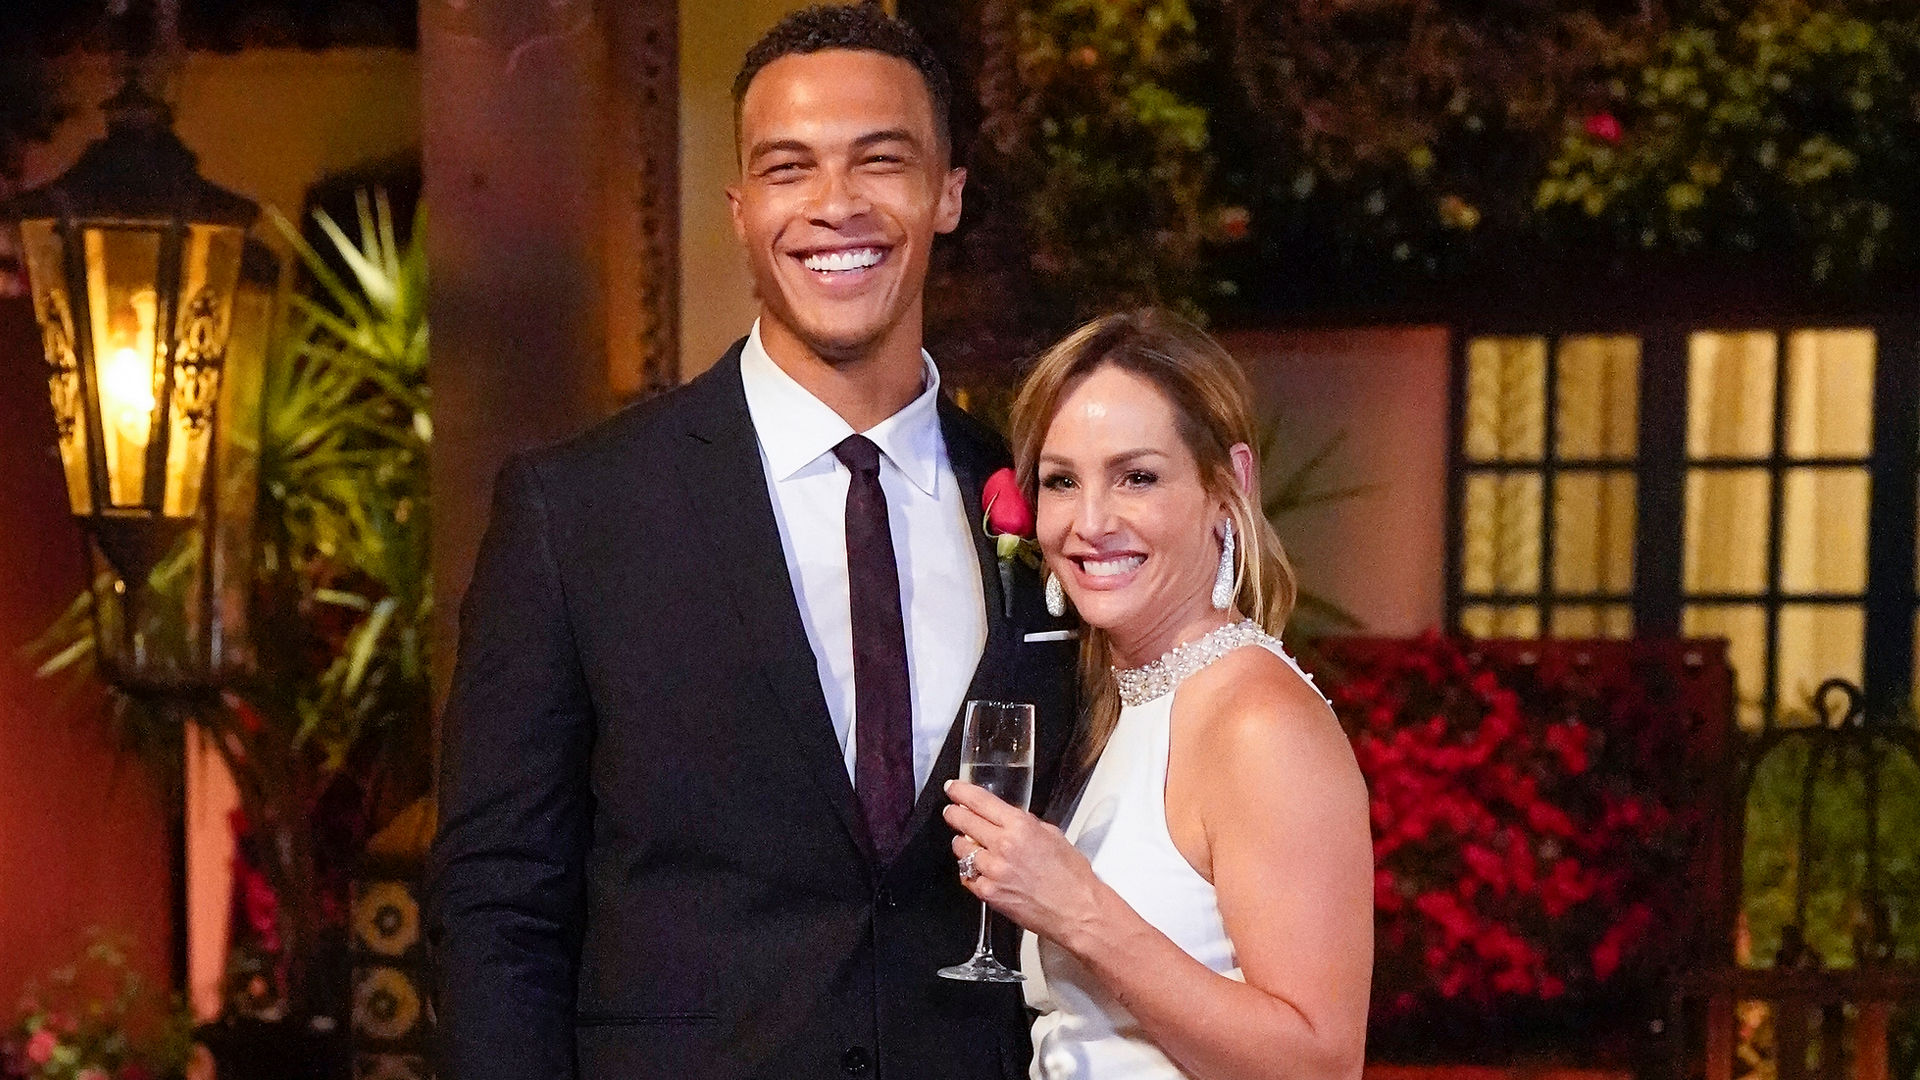 Dale Moss and Clare Crawley on 'The Bachelorette' Season 16 Episode 4